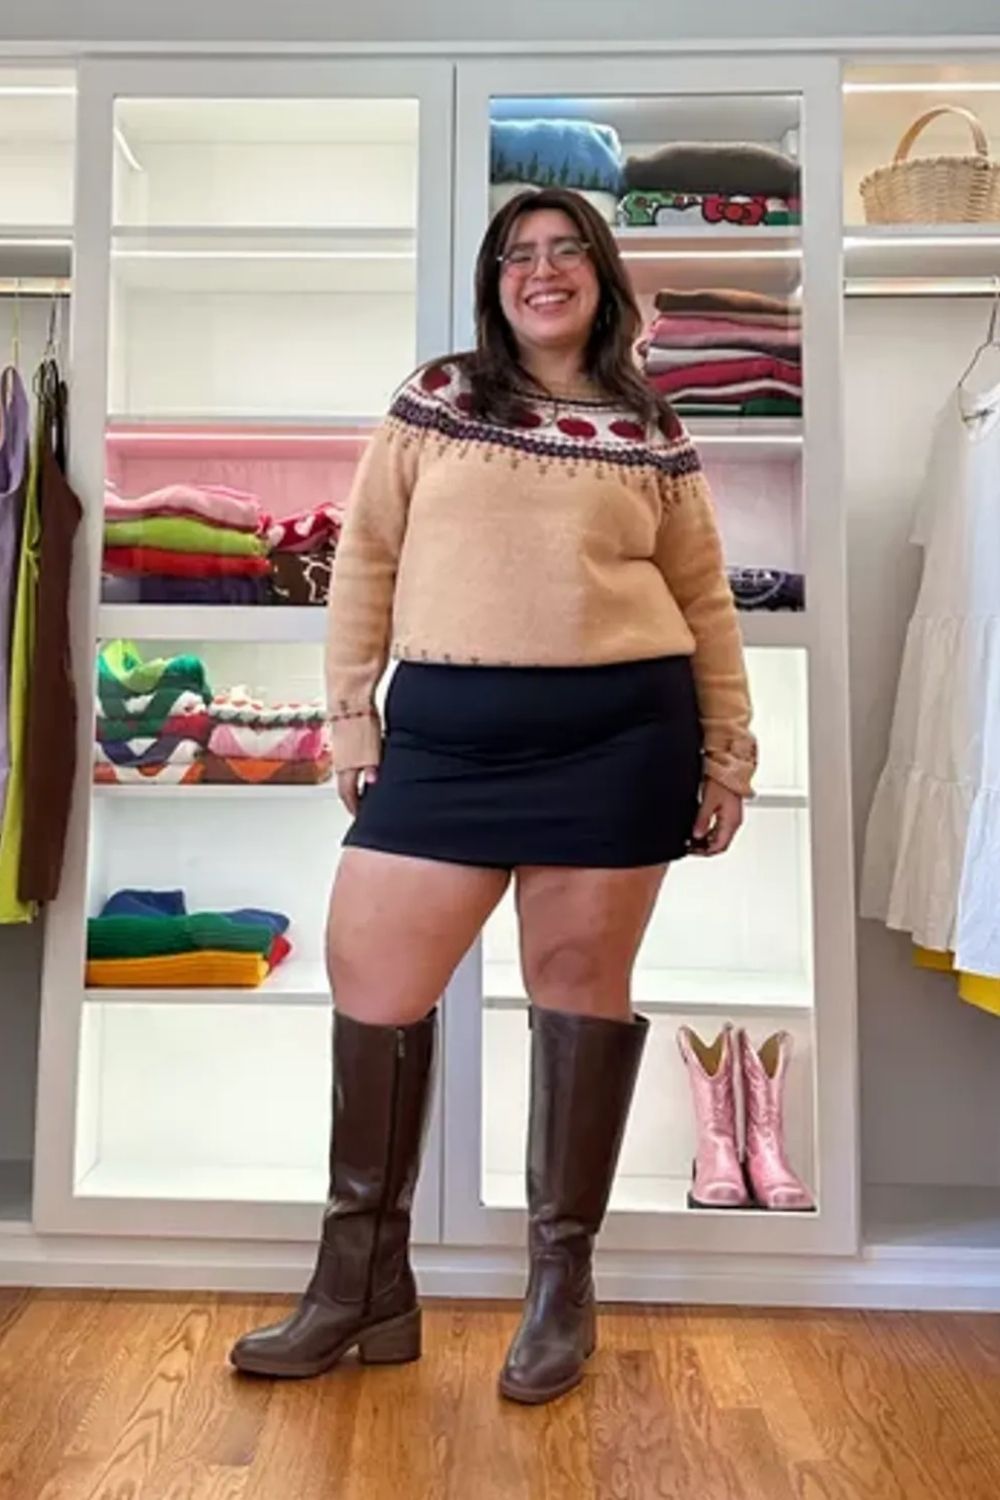 Presenting a chic and cozy style, this outfit features a warm-toned, patterned sweater for visual interest, a black skirt for sleek contrast, and knee-high boots that complement the ensemble, adding an elegant and fashionable touch, seamlessly tying the look together.